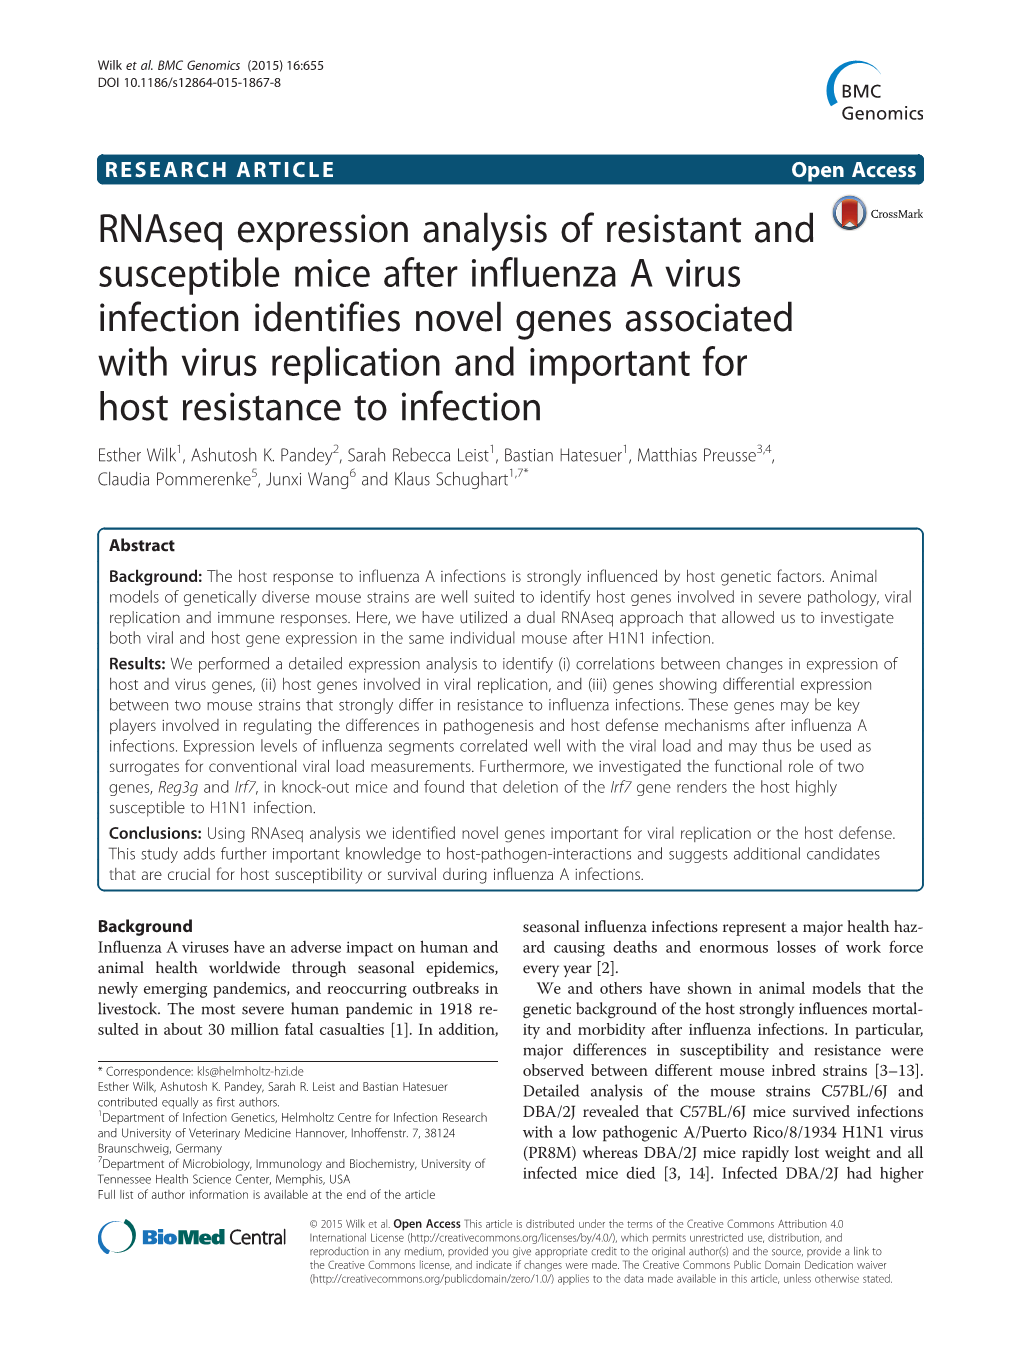 Rnaseq Expression Analysis of Resistant and Susceptible Mice After